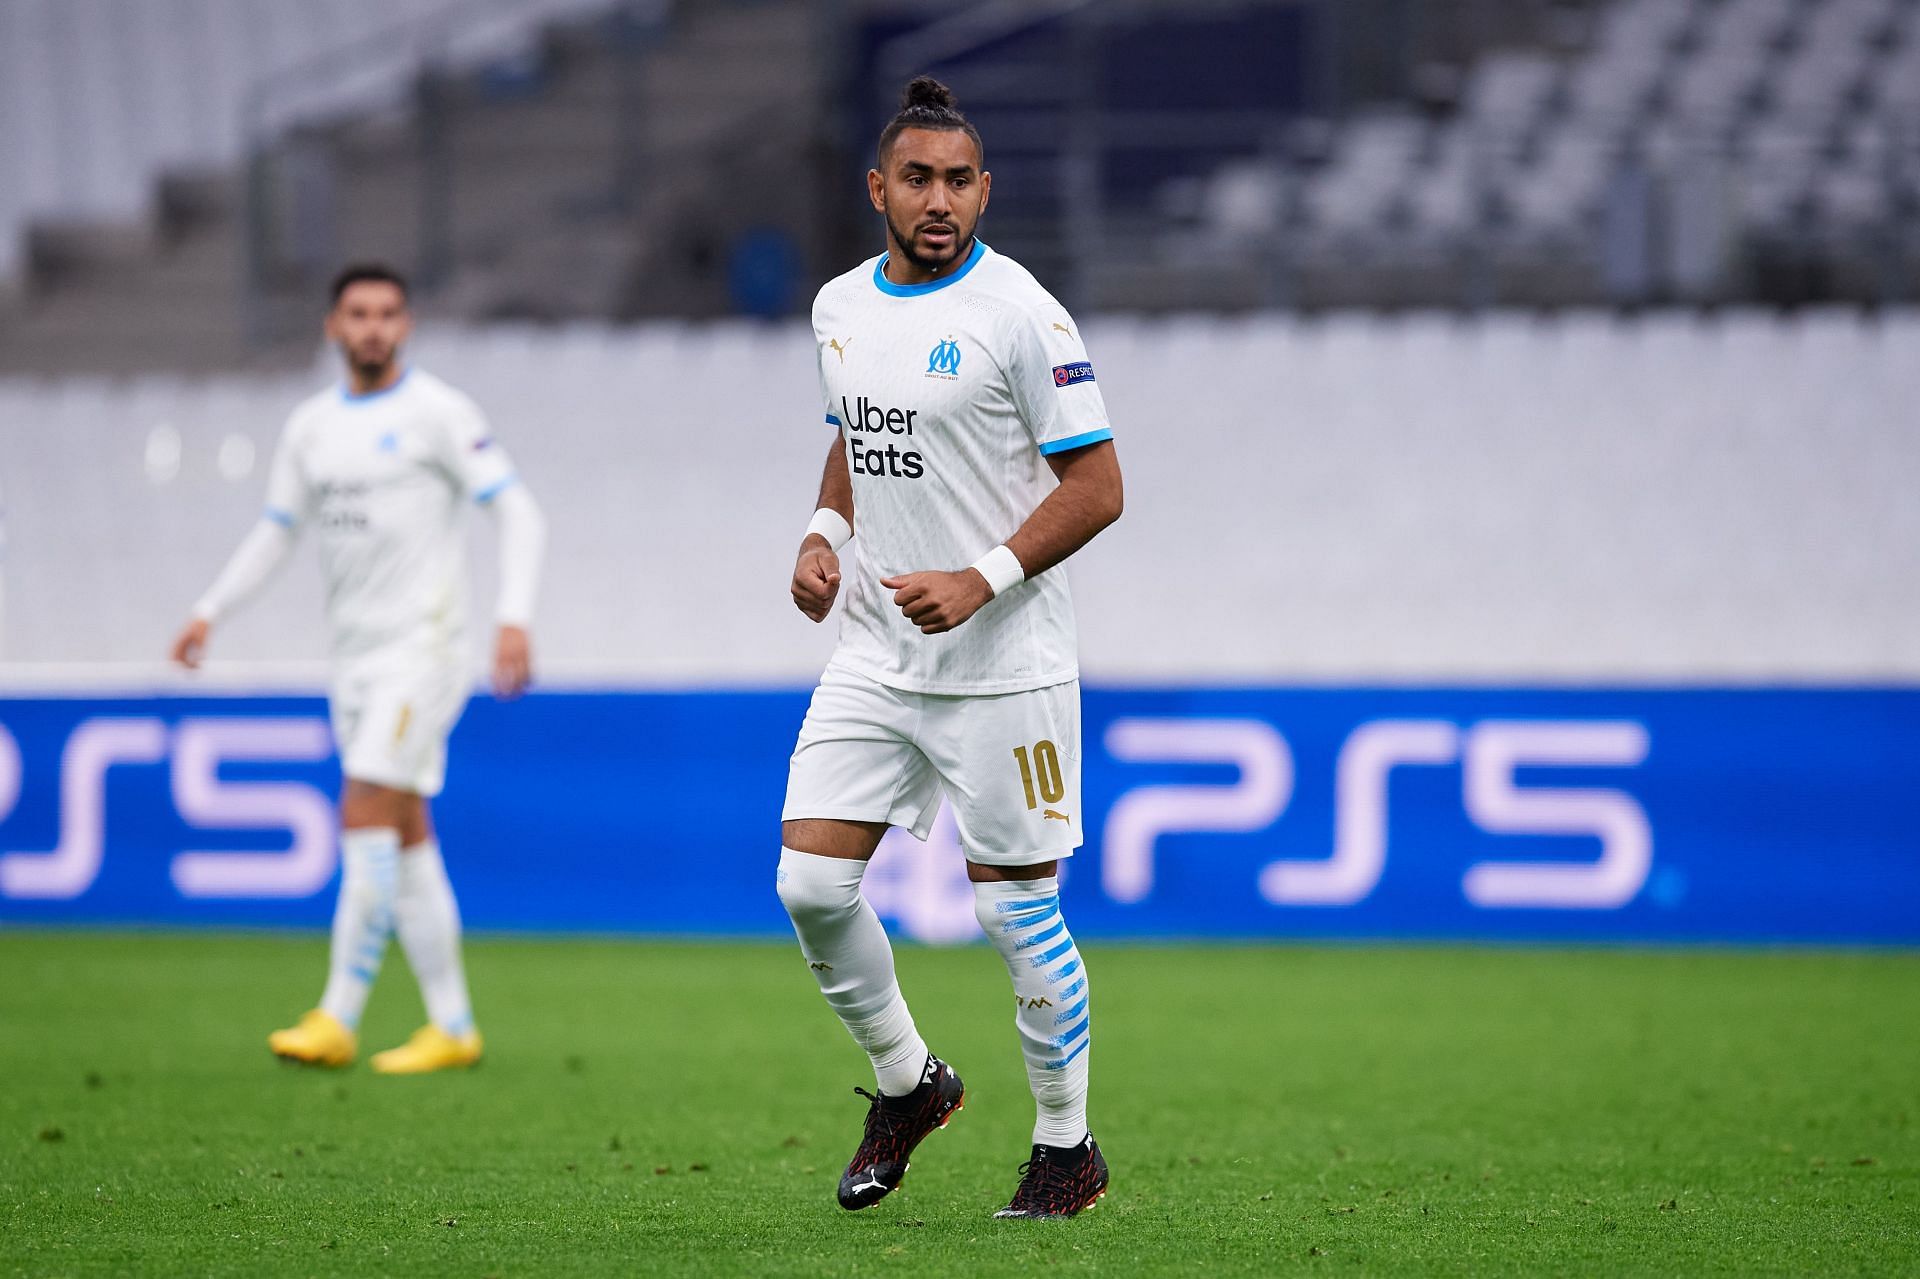 Marseille and Bordeaux lock horns in the first Ligue 1 game of 2022 on Friday